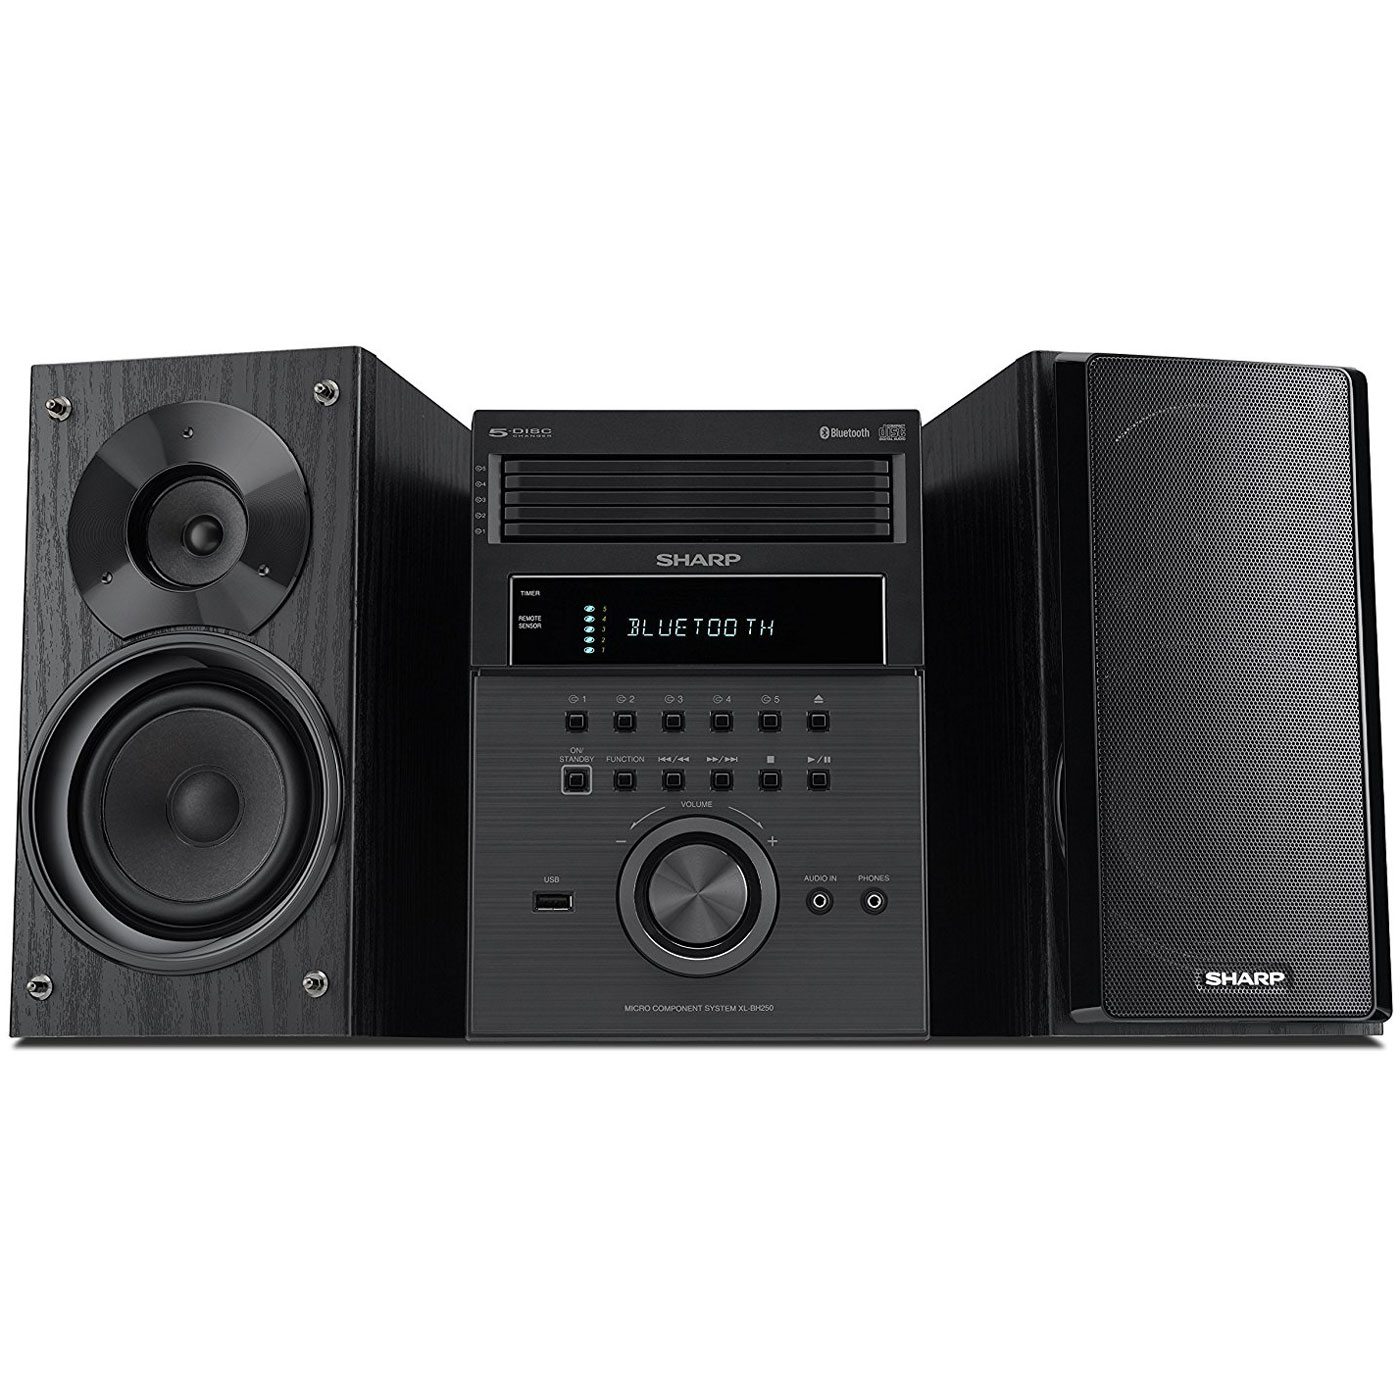 Sharp XL-BH250 Sharp 5-Disc Micro Shelf Executive Speaker System with Bluetooth, USB Port for MP3 Playback, AM/FM, Audio in for Digital Players - image 1 of 2